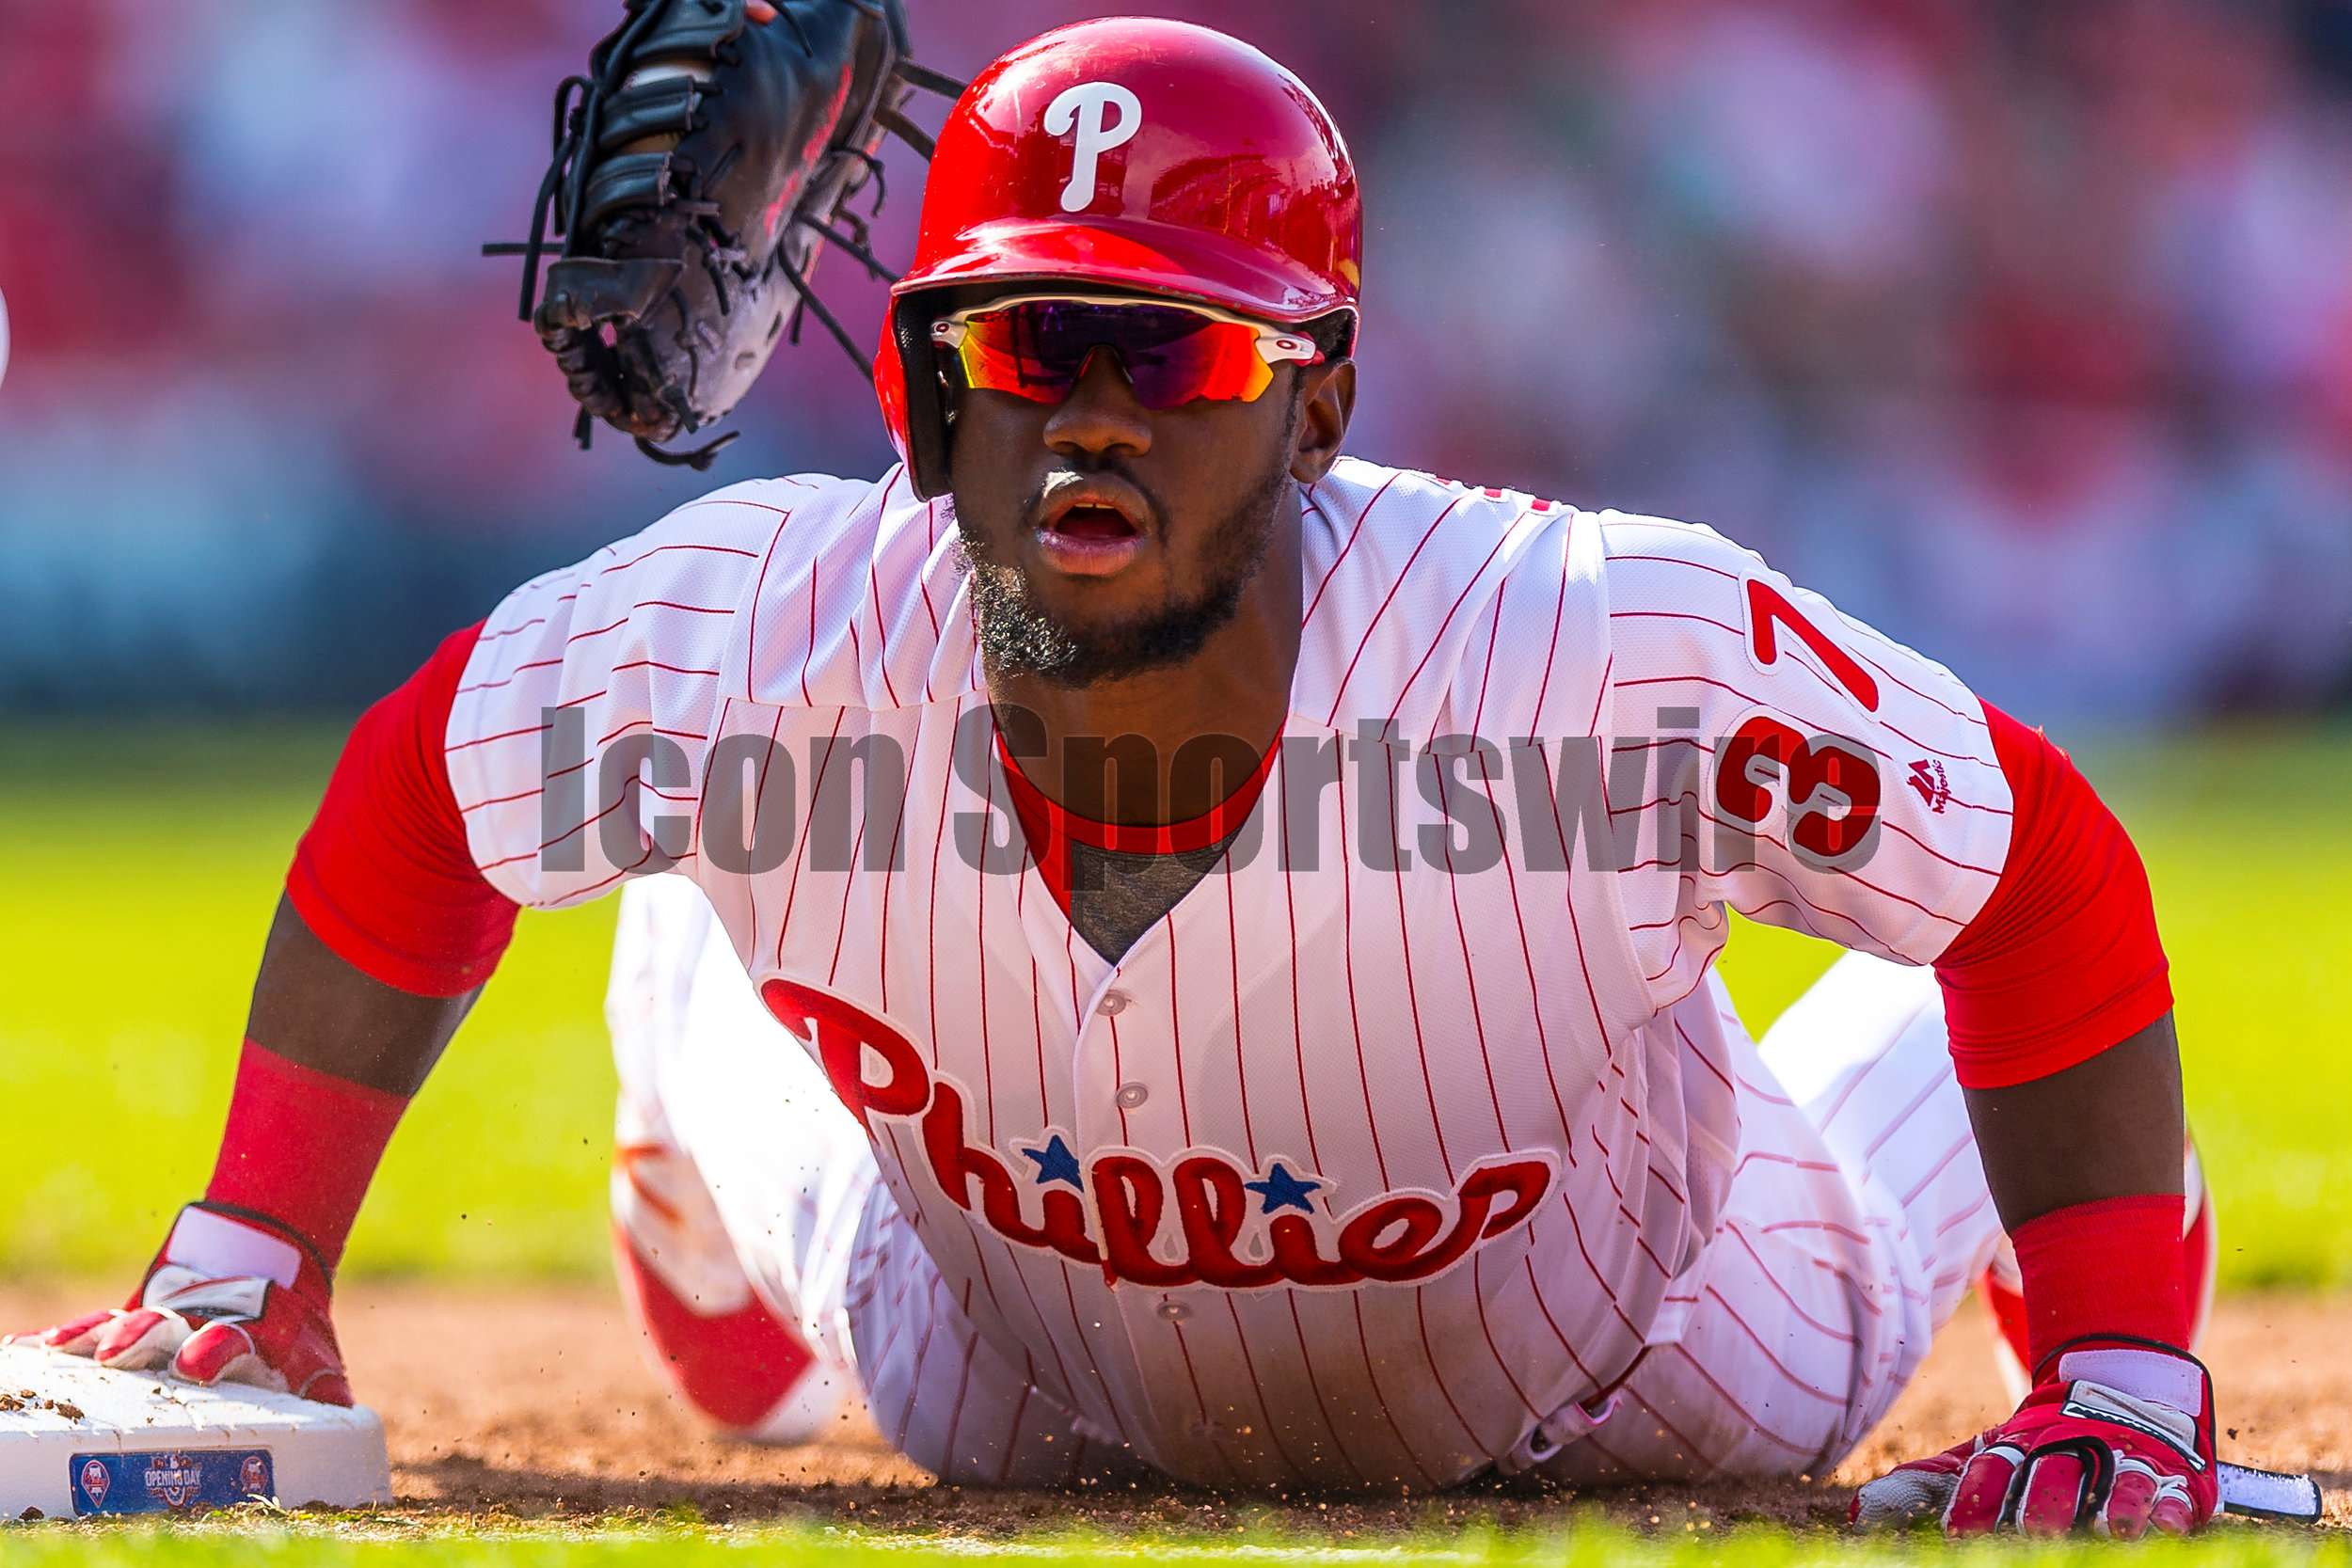  11 April 2016: Philadelphia Phillies center fielder Odubel Herrera (37) dives safely back to first during the MLB game between the Philadelphia Phillies and the San Diego Padres played at Citizens Bank Park in Philadelphia, PA. (Photo by Gavin Baker